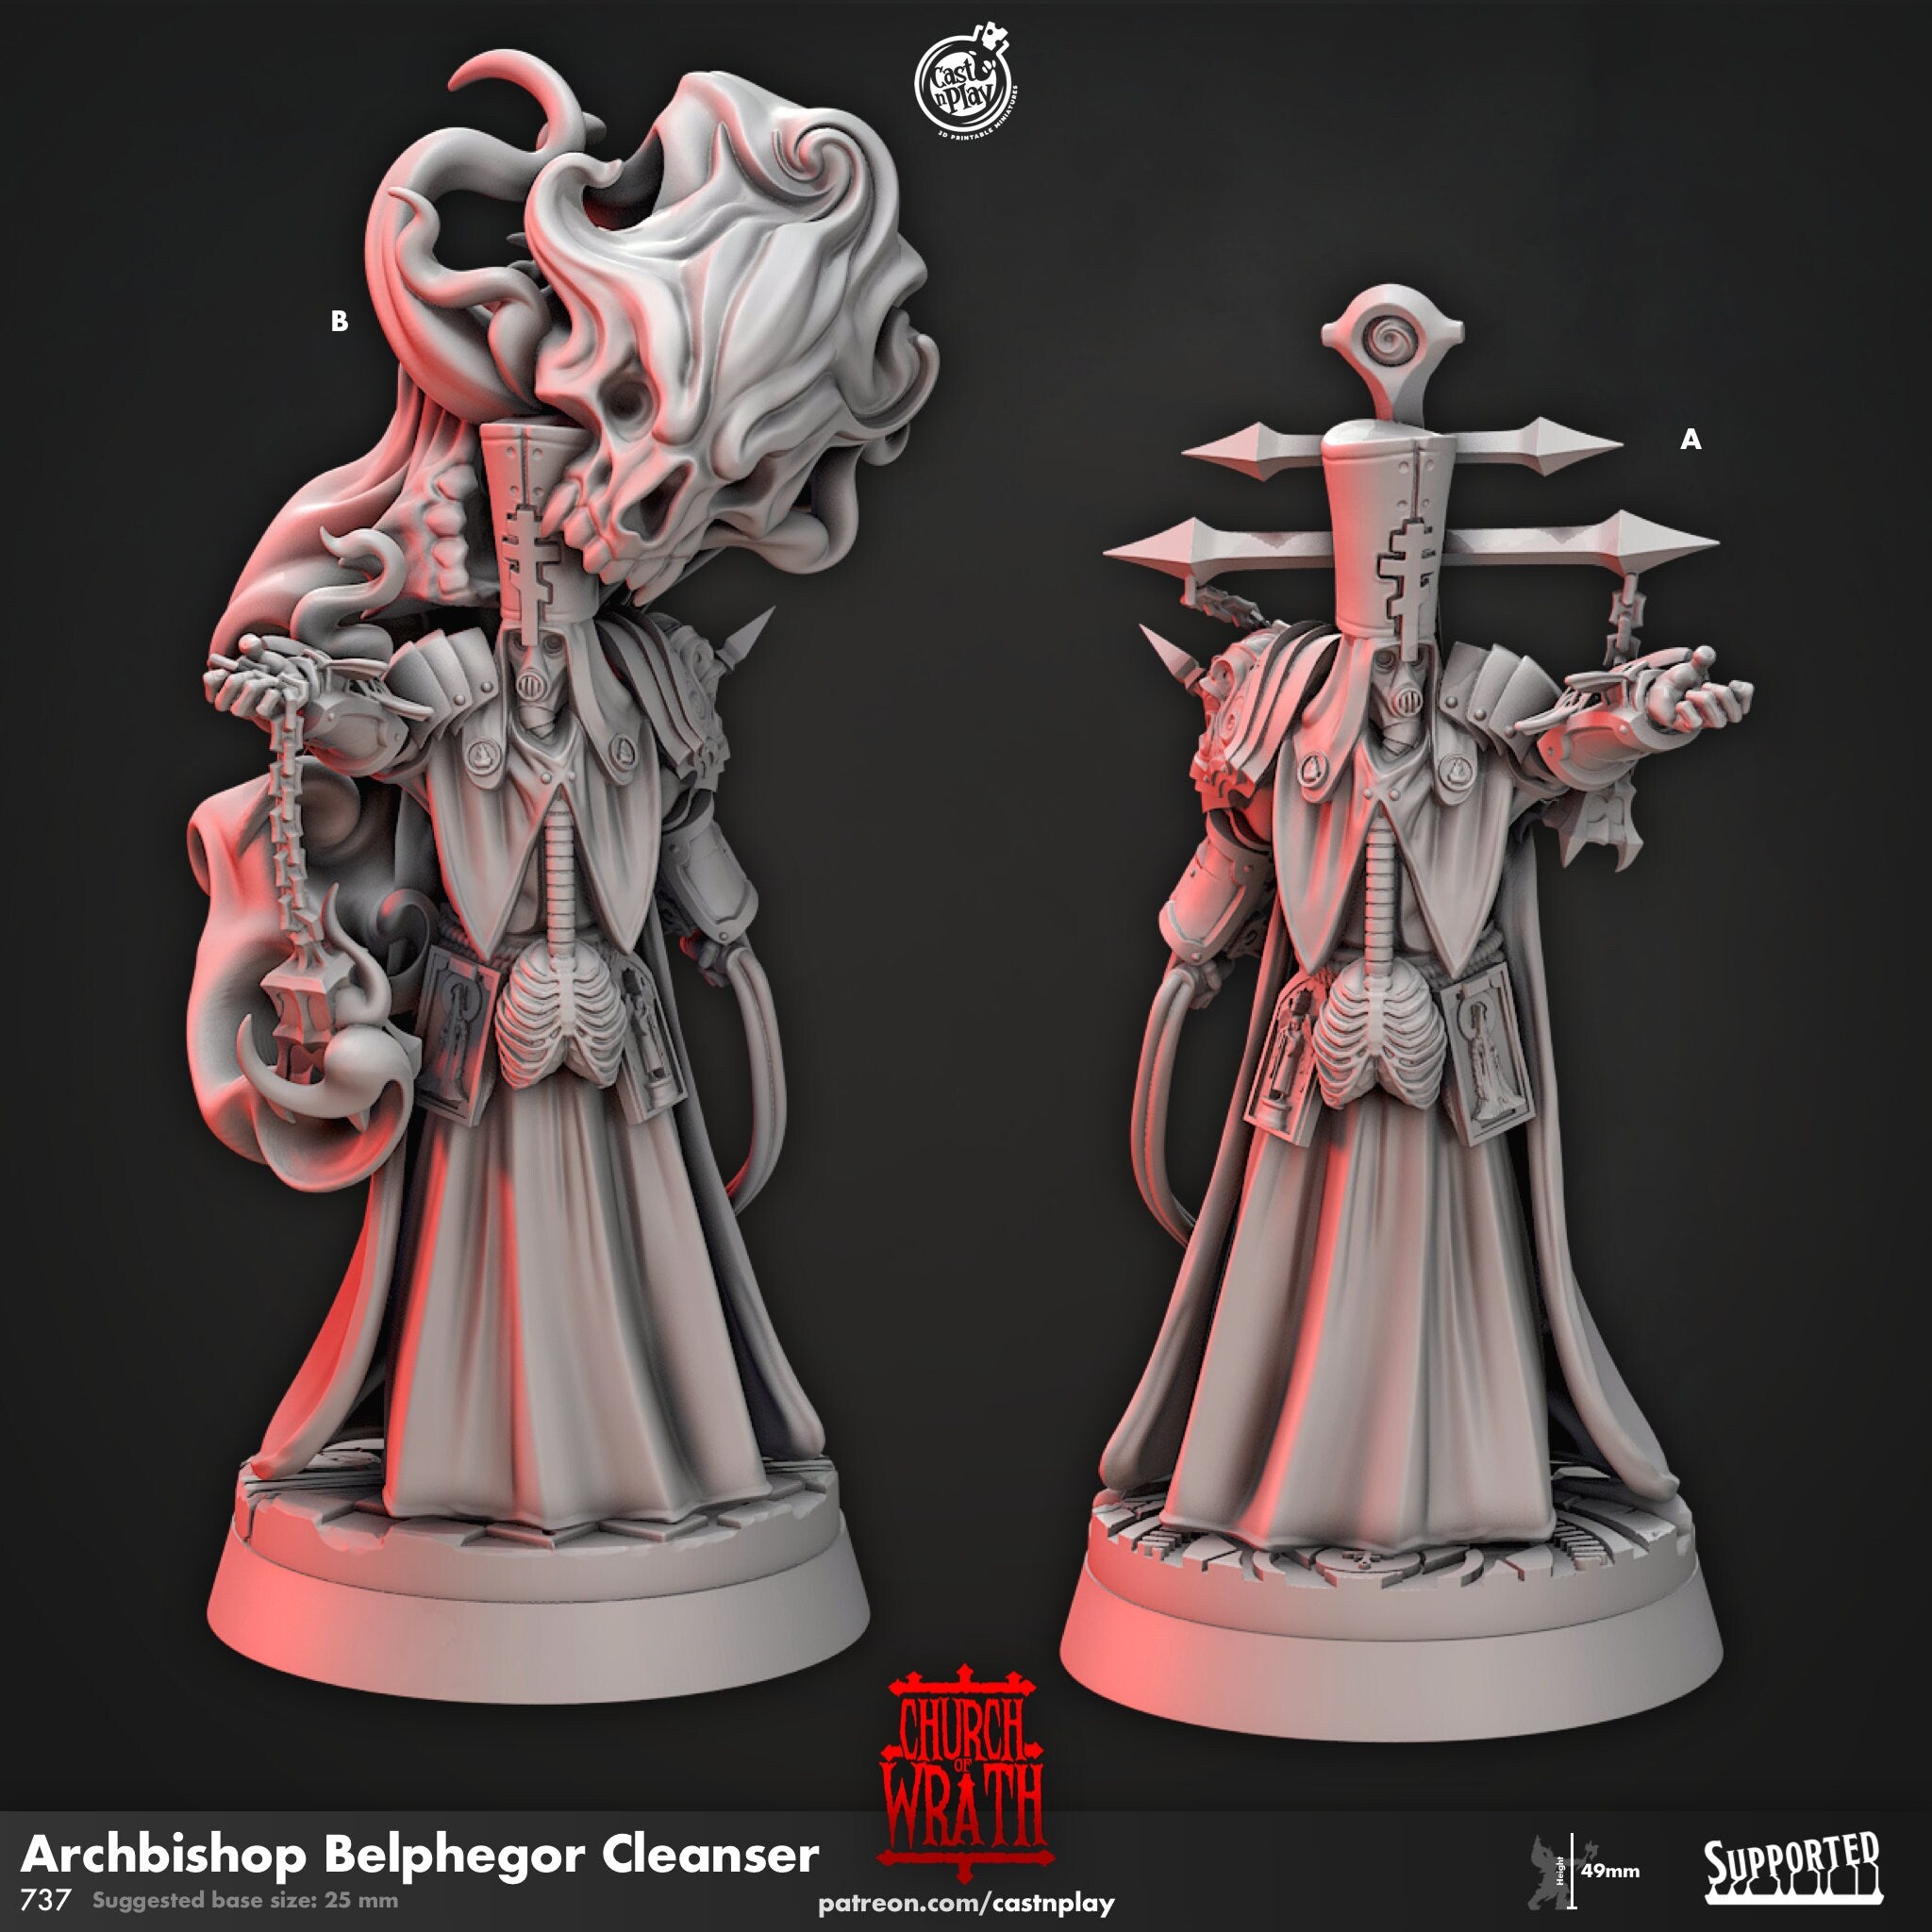 Bishop Cleric "Archbishop Belphegor Cleanser"" | 12K DnD | Wargaming | Dungeons and Dragons | Pathfinder | Tabletop | RPG | 28-32 mm-Role Playing Miniatures